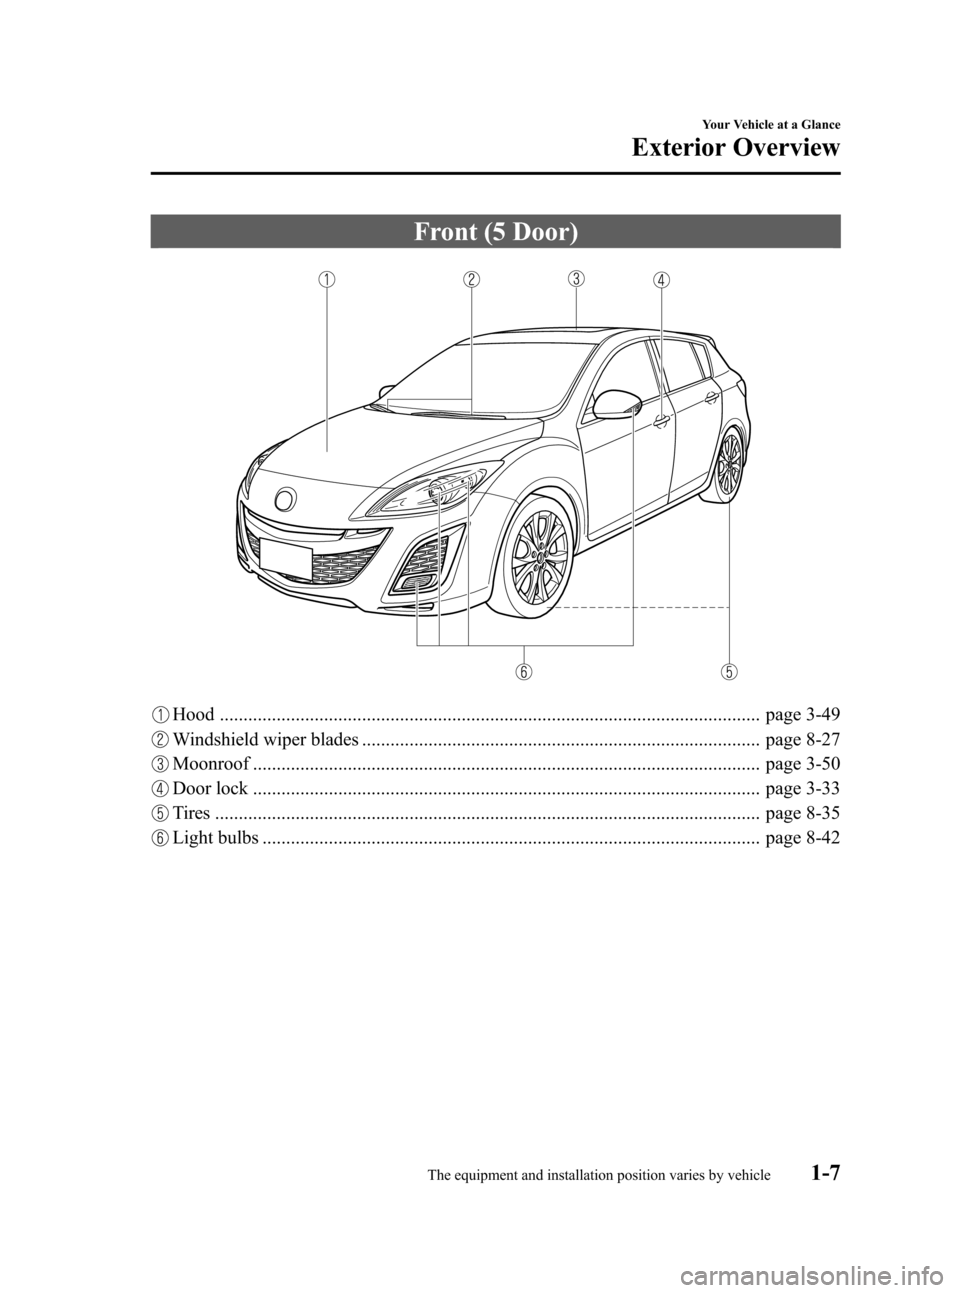 MAZDA MODEL 3 HATCHBACK 2011  Owners Manual (in English) Black plate (13,1)
Front (5 Door)
Hood .................................................................................................................. page 3-49
Windshield wiper blades ............